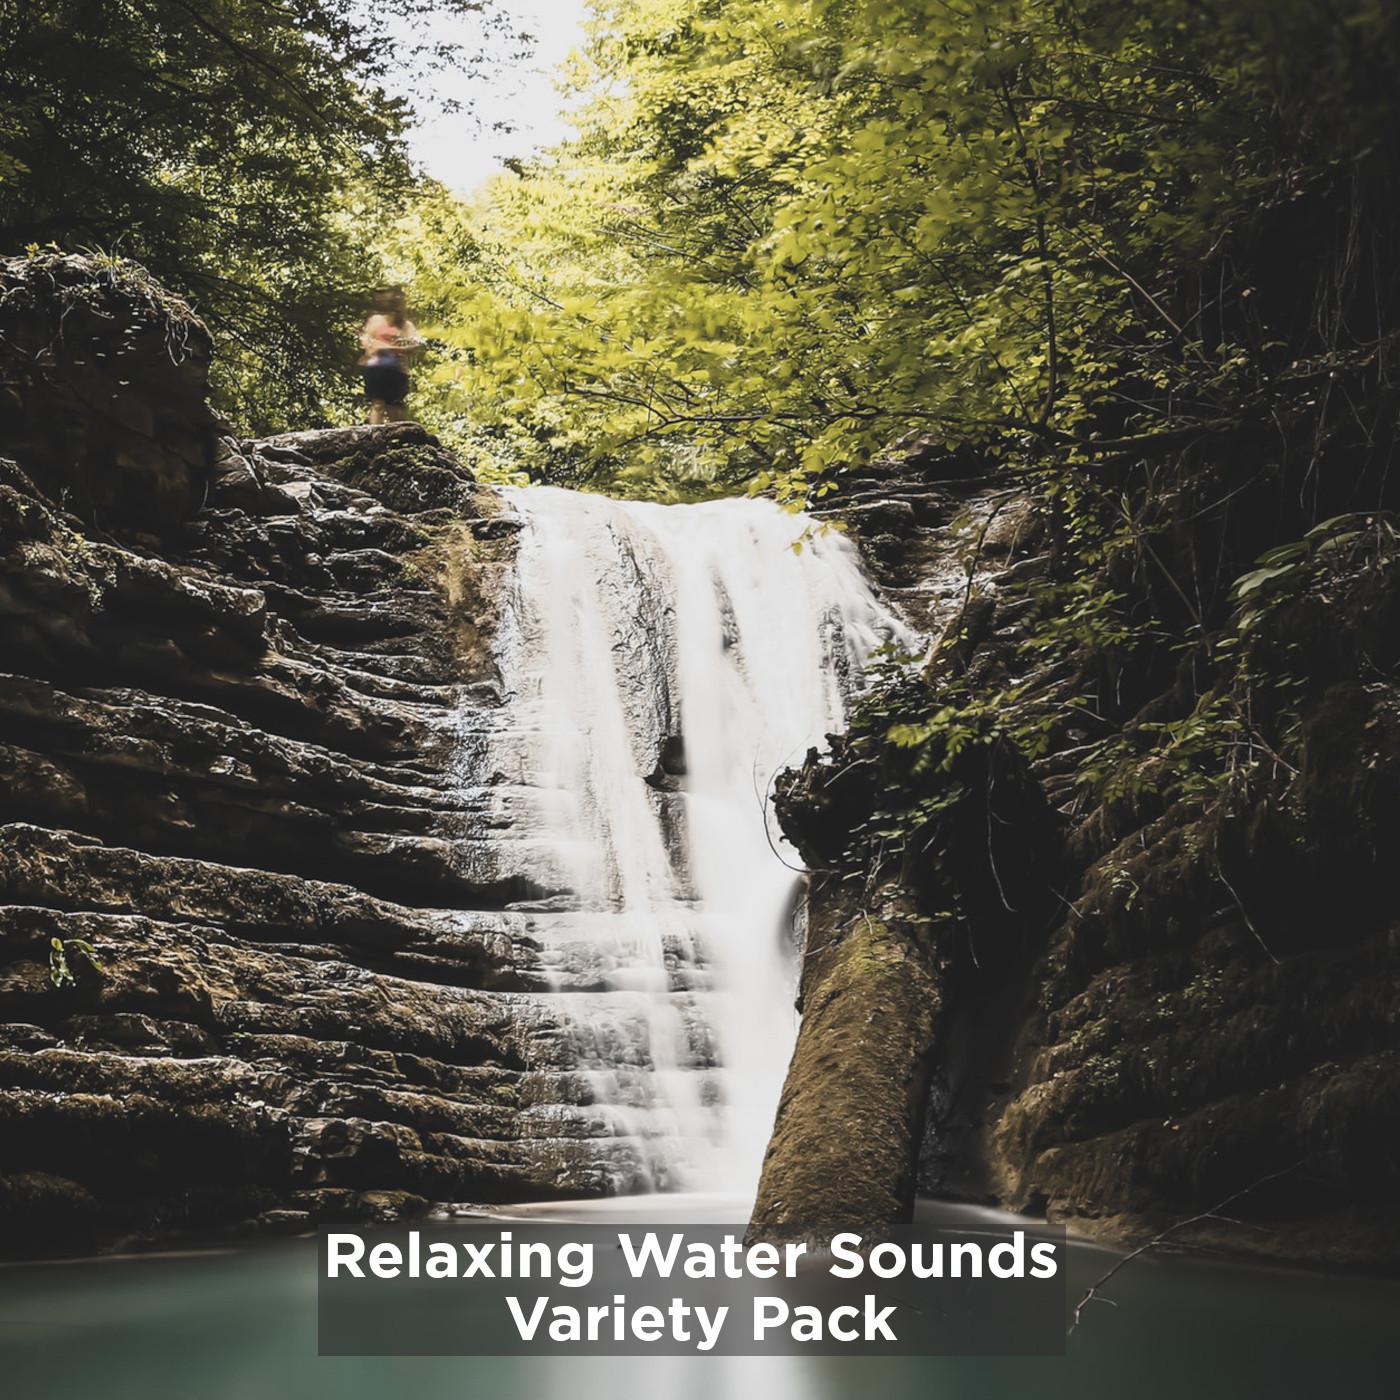 Relaxing Water Sounds Variety Pack